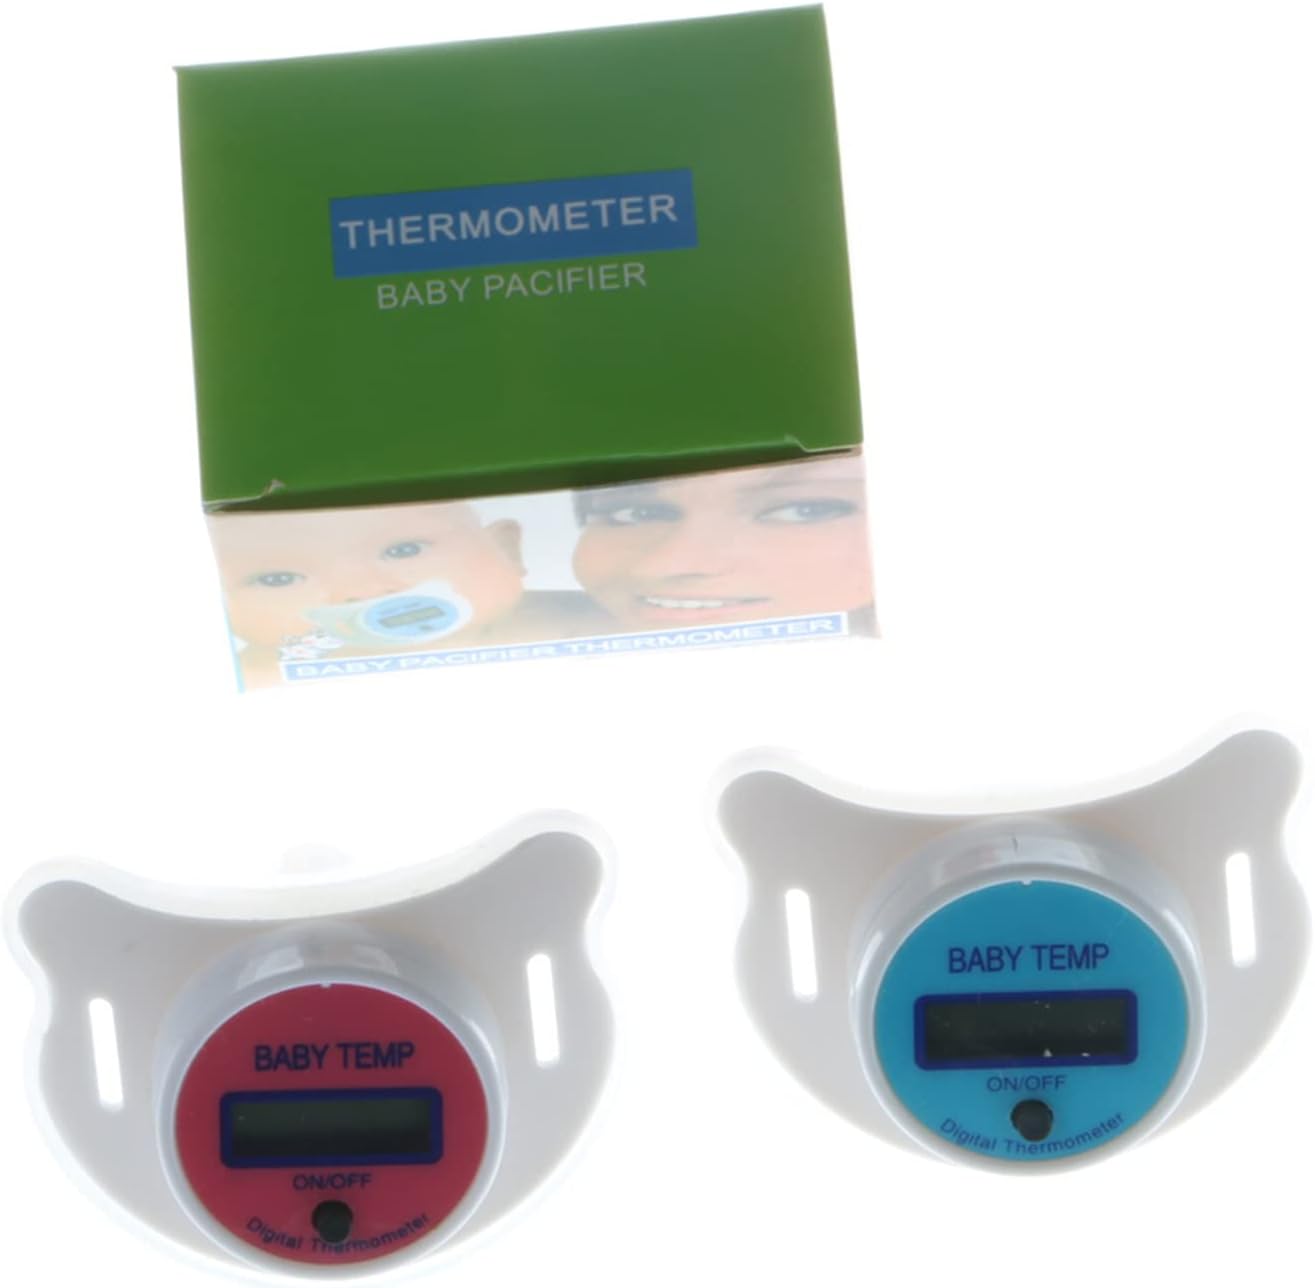 High Accuracy Thermometer LCD Display Nipple-Shaped Thermometer Pacifier Babies's Heating Fever Monitor Gauge Pink/Blue Digital Thermometer for Baby Oral Mouth Temperature Measuring Pink/Blue Nipple : Baby